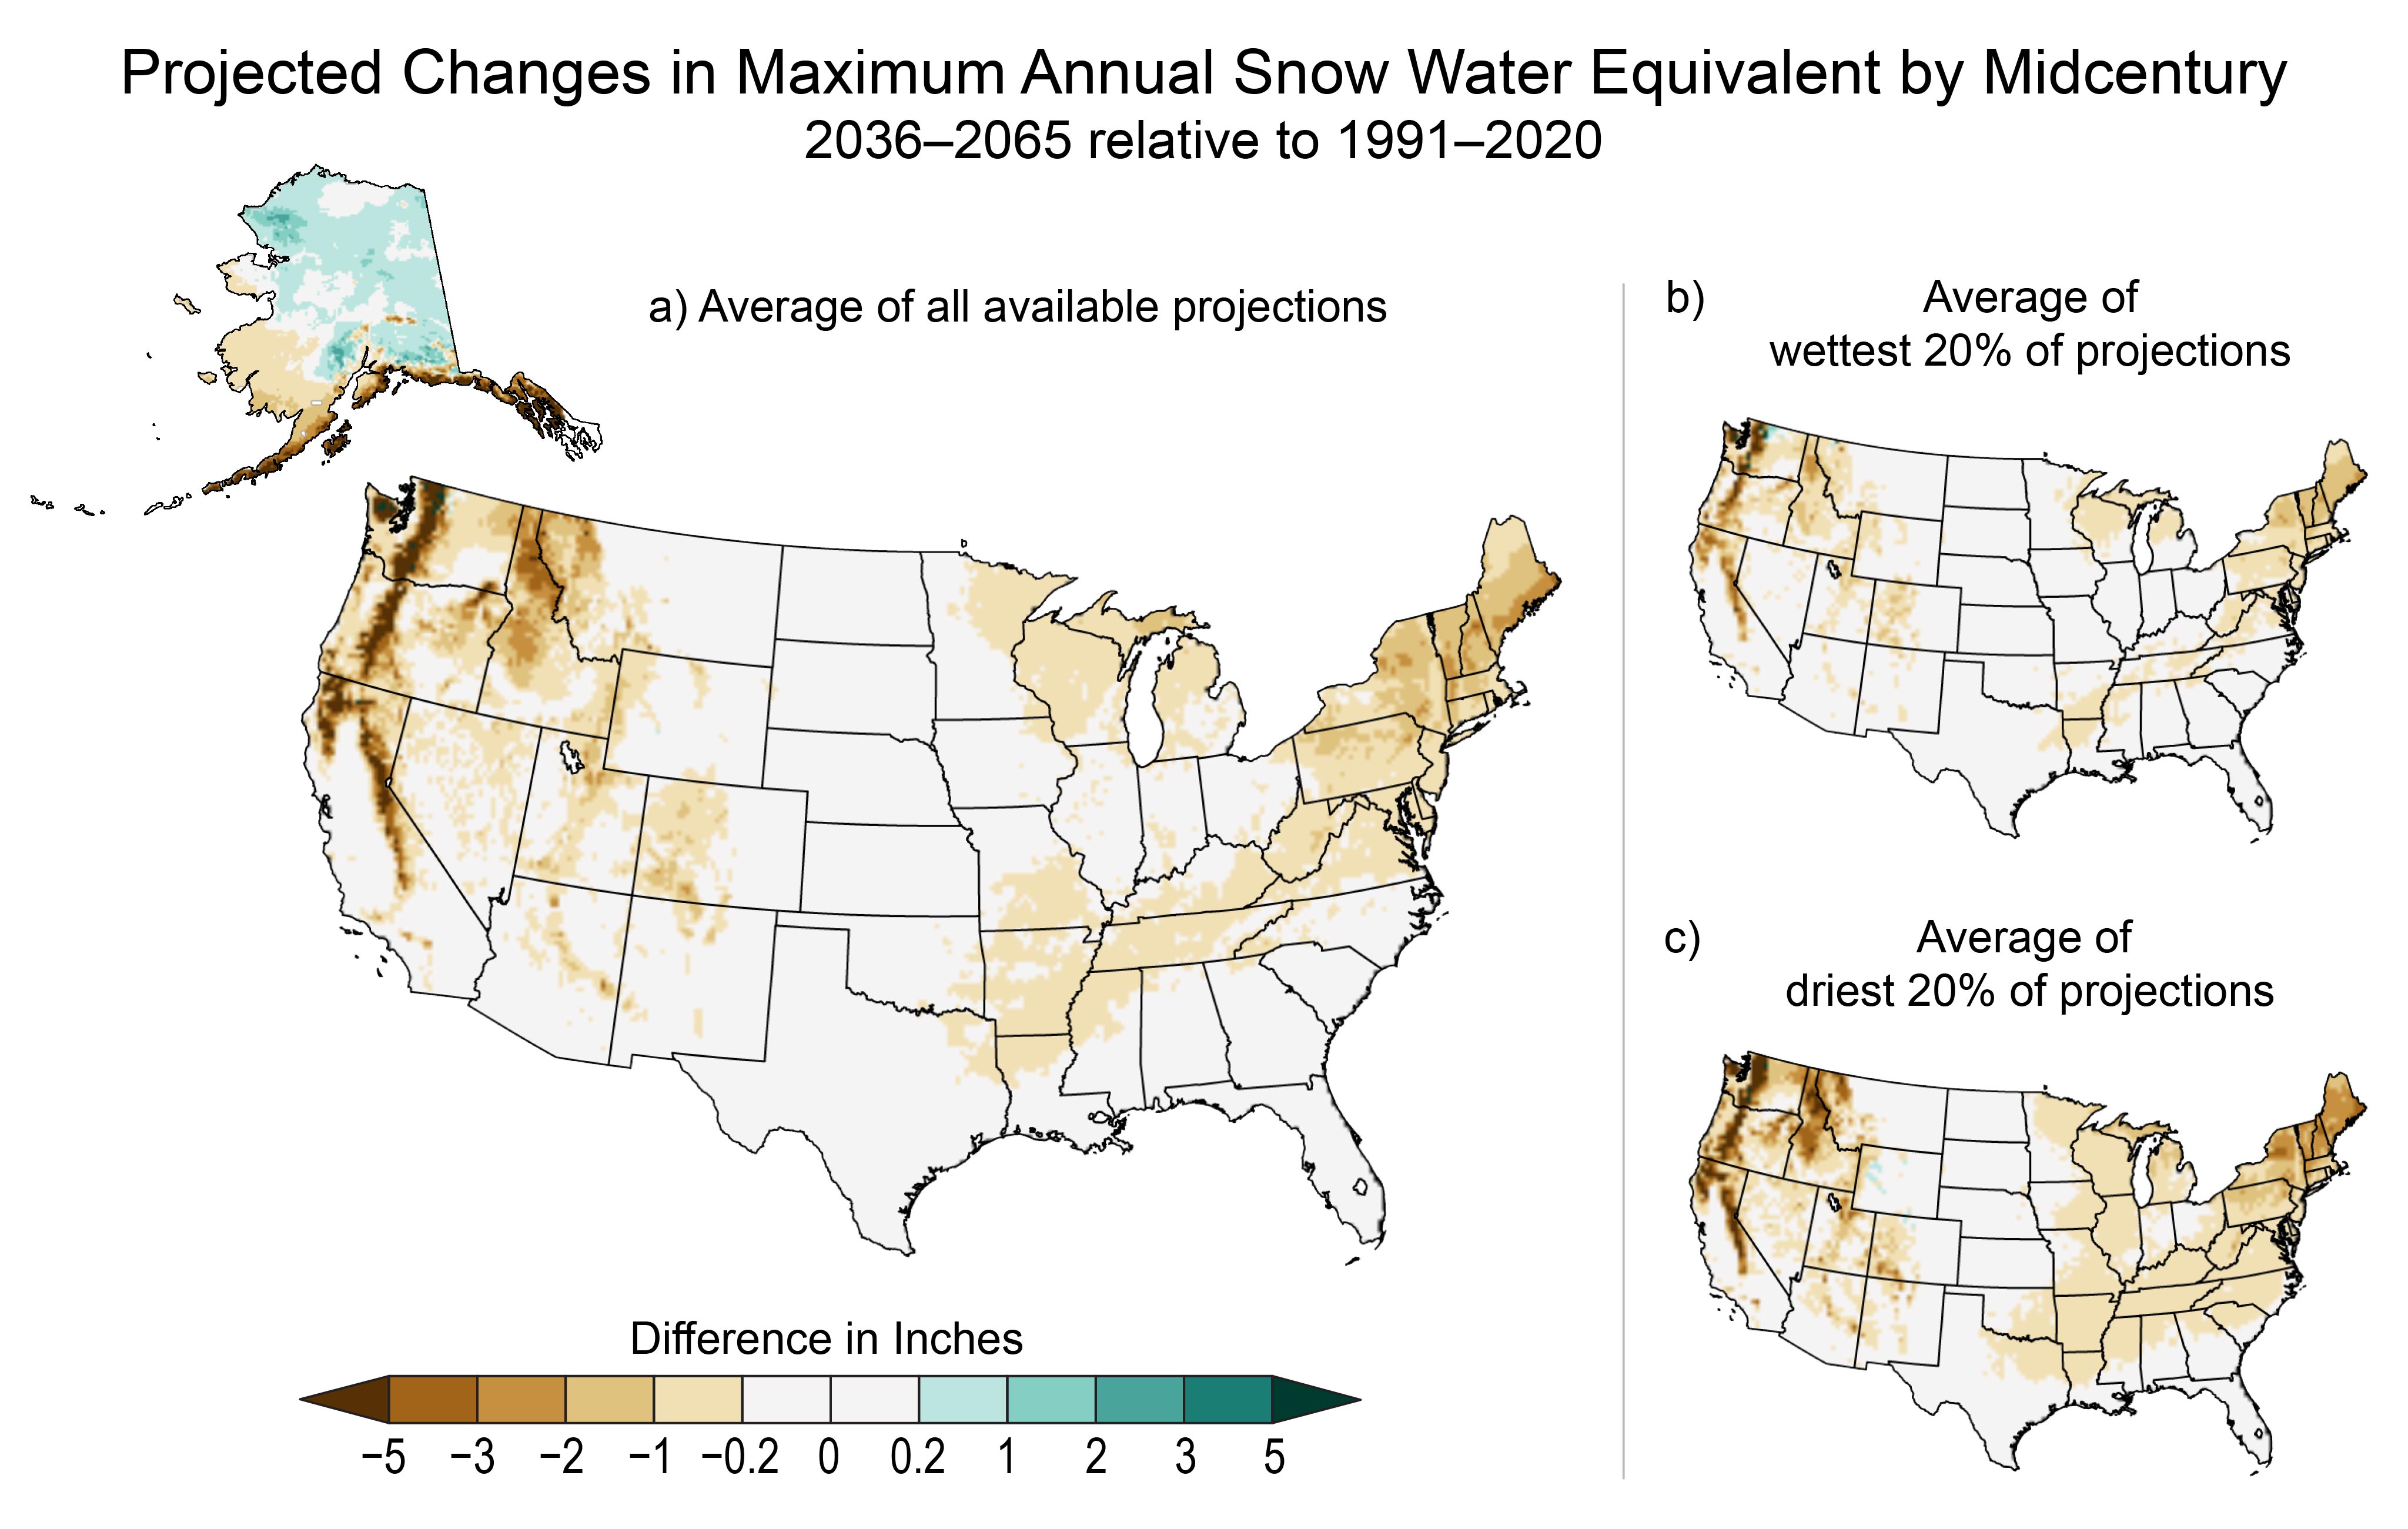 Projected Changes in Maximum Annual Snow Water Equivalent by Midcentury